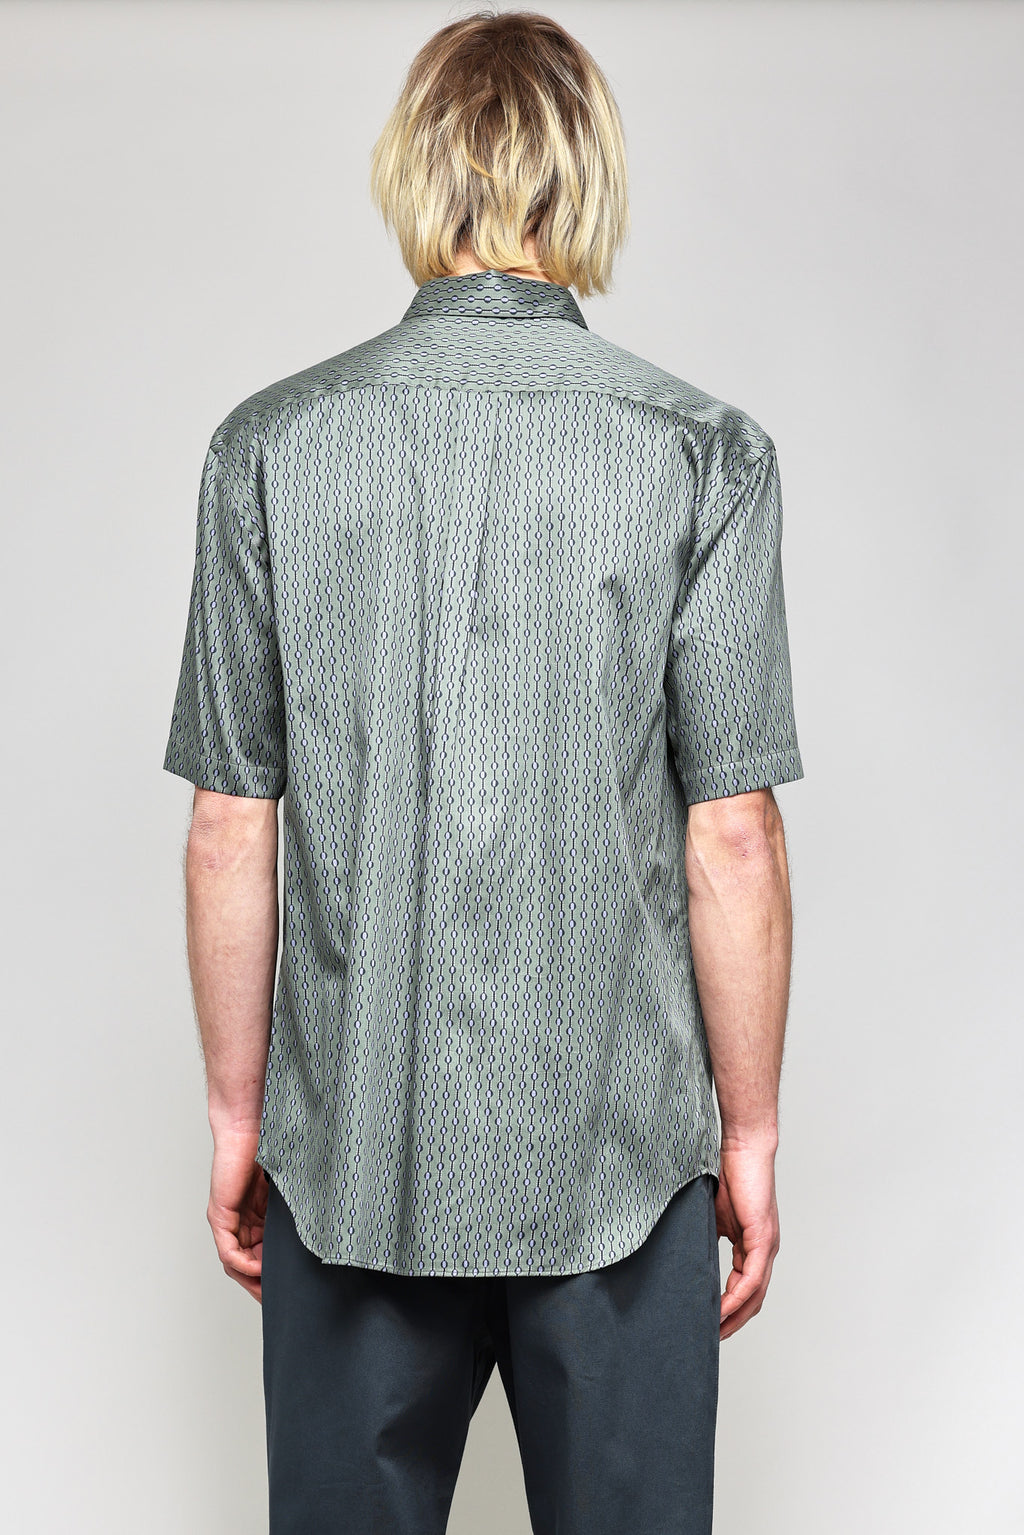 Japanese Dotted Stripe Print in Green 03